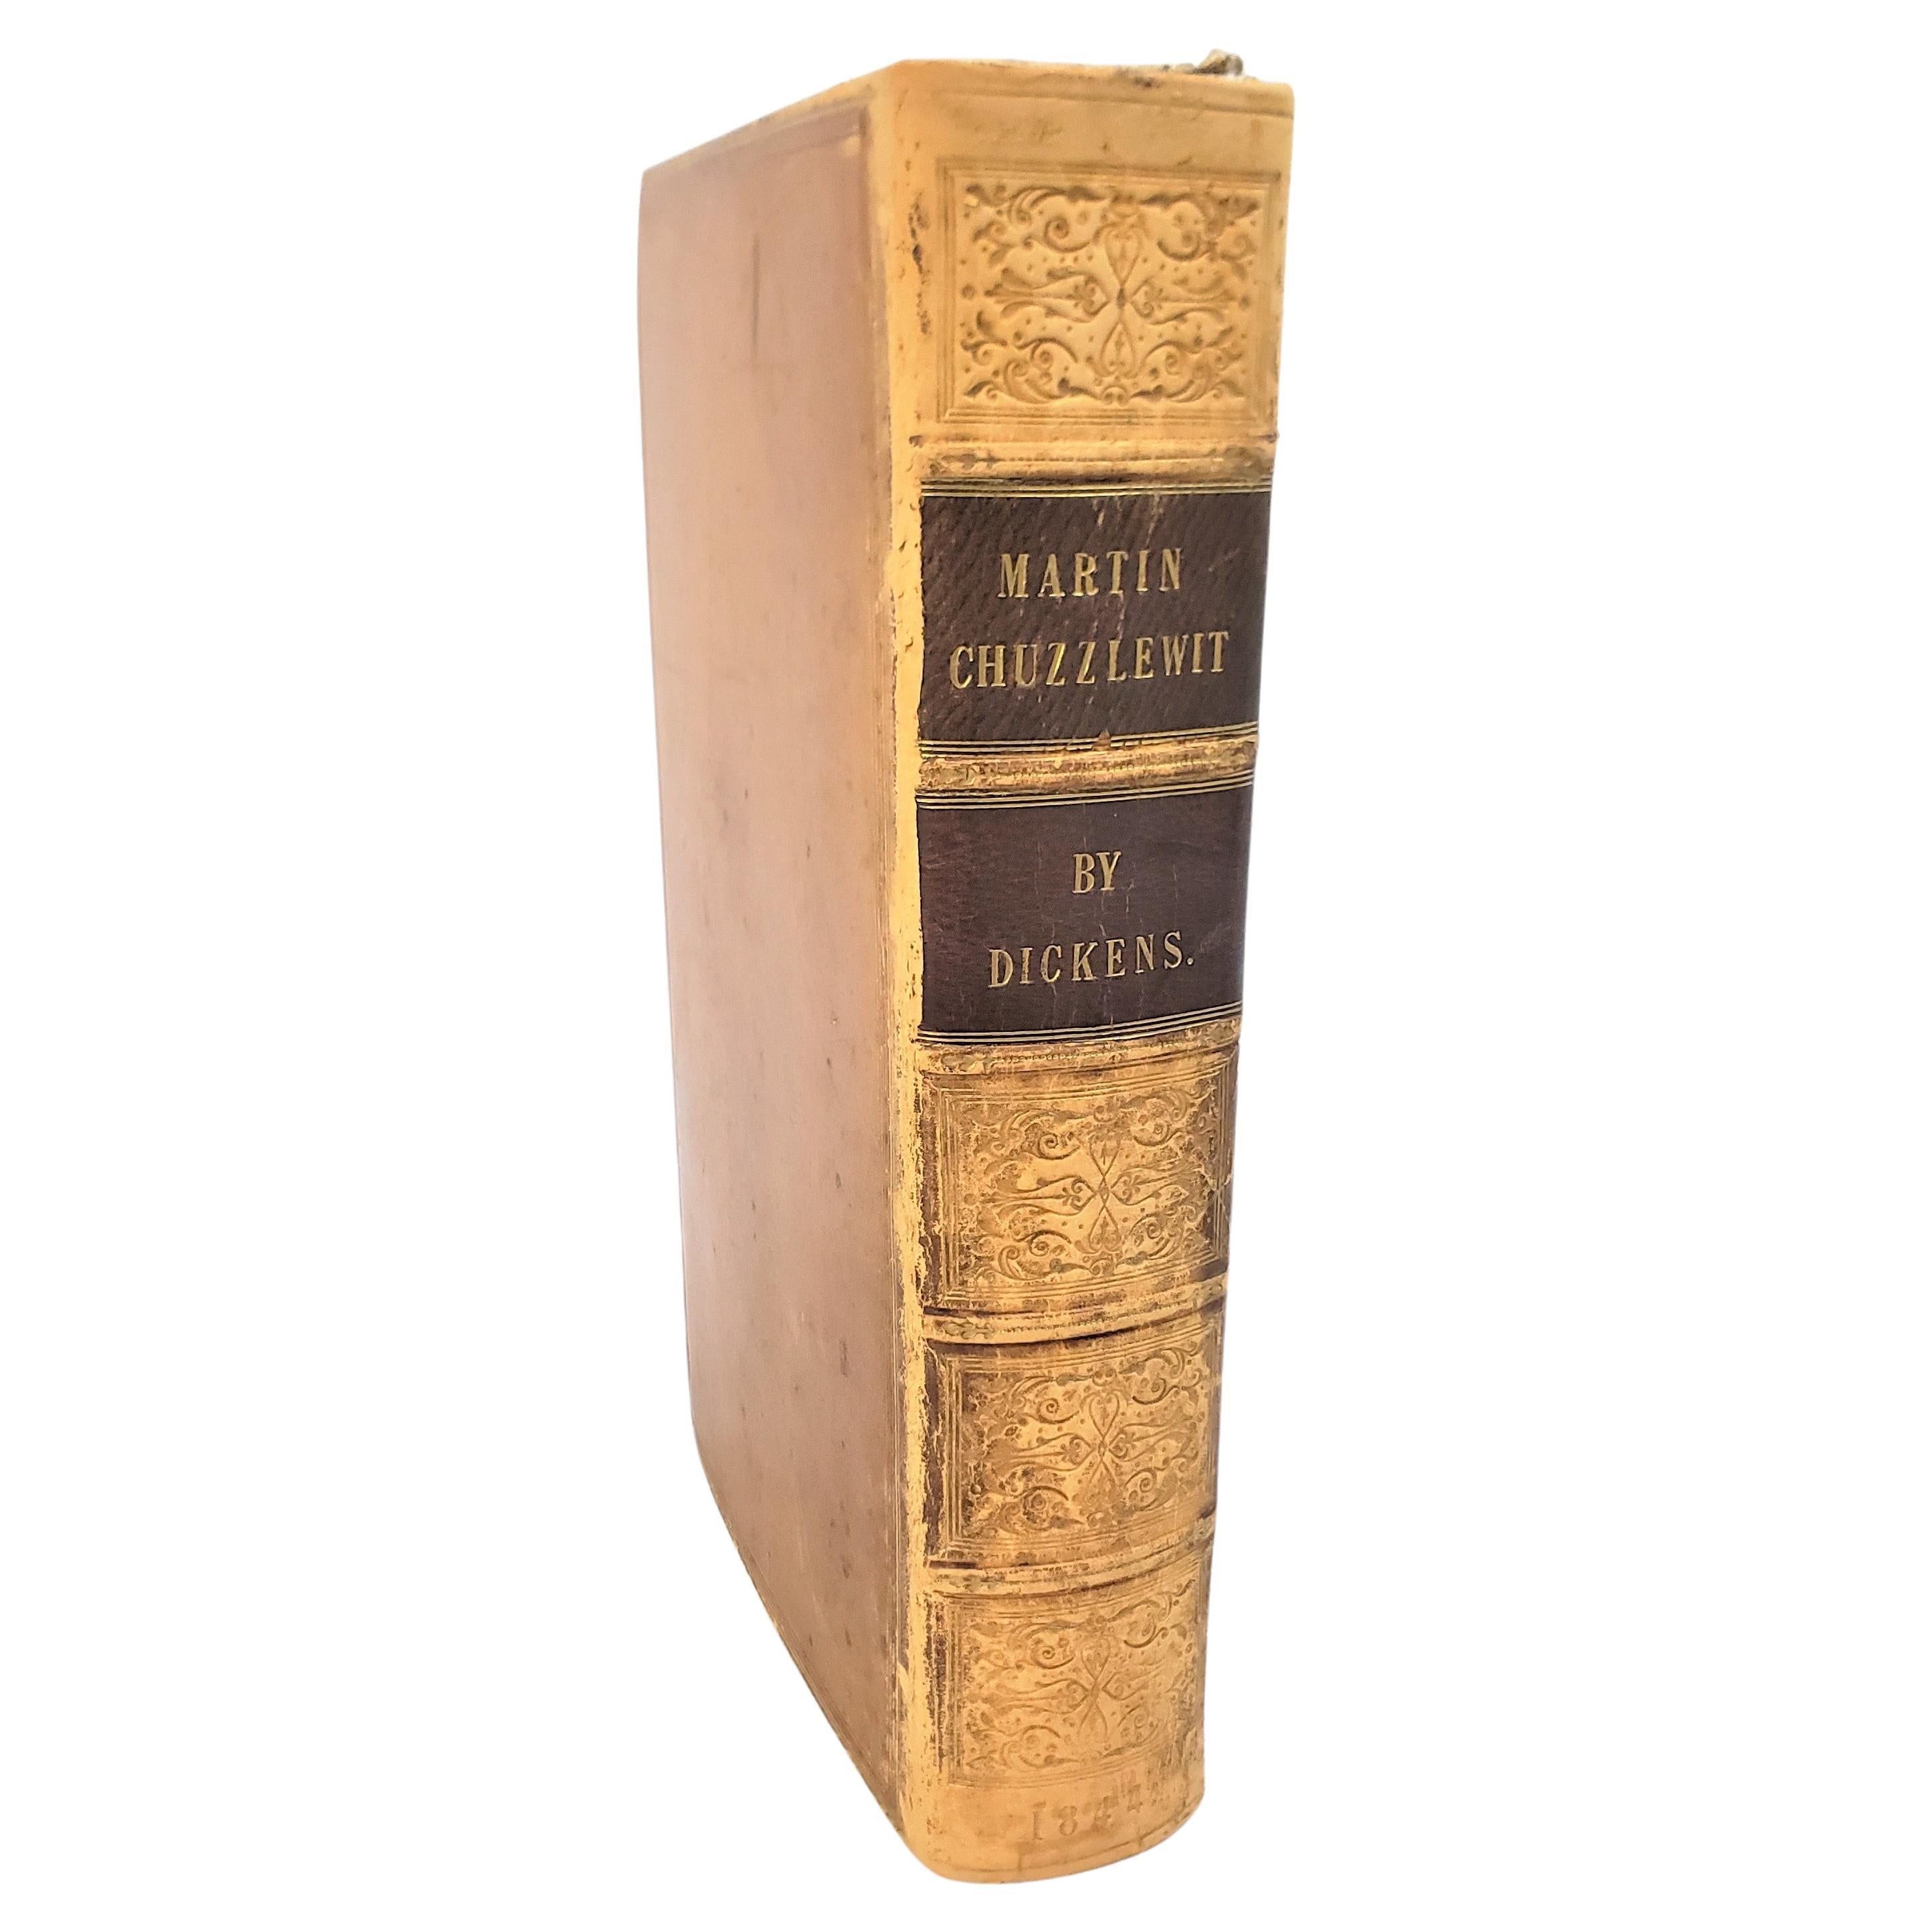 Antique Charles Dickens First Edition Martin Chuzzlewit 1844 Chapman & Hall Book For Sale